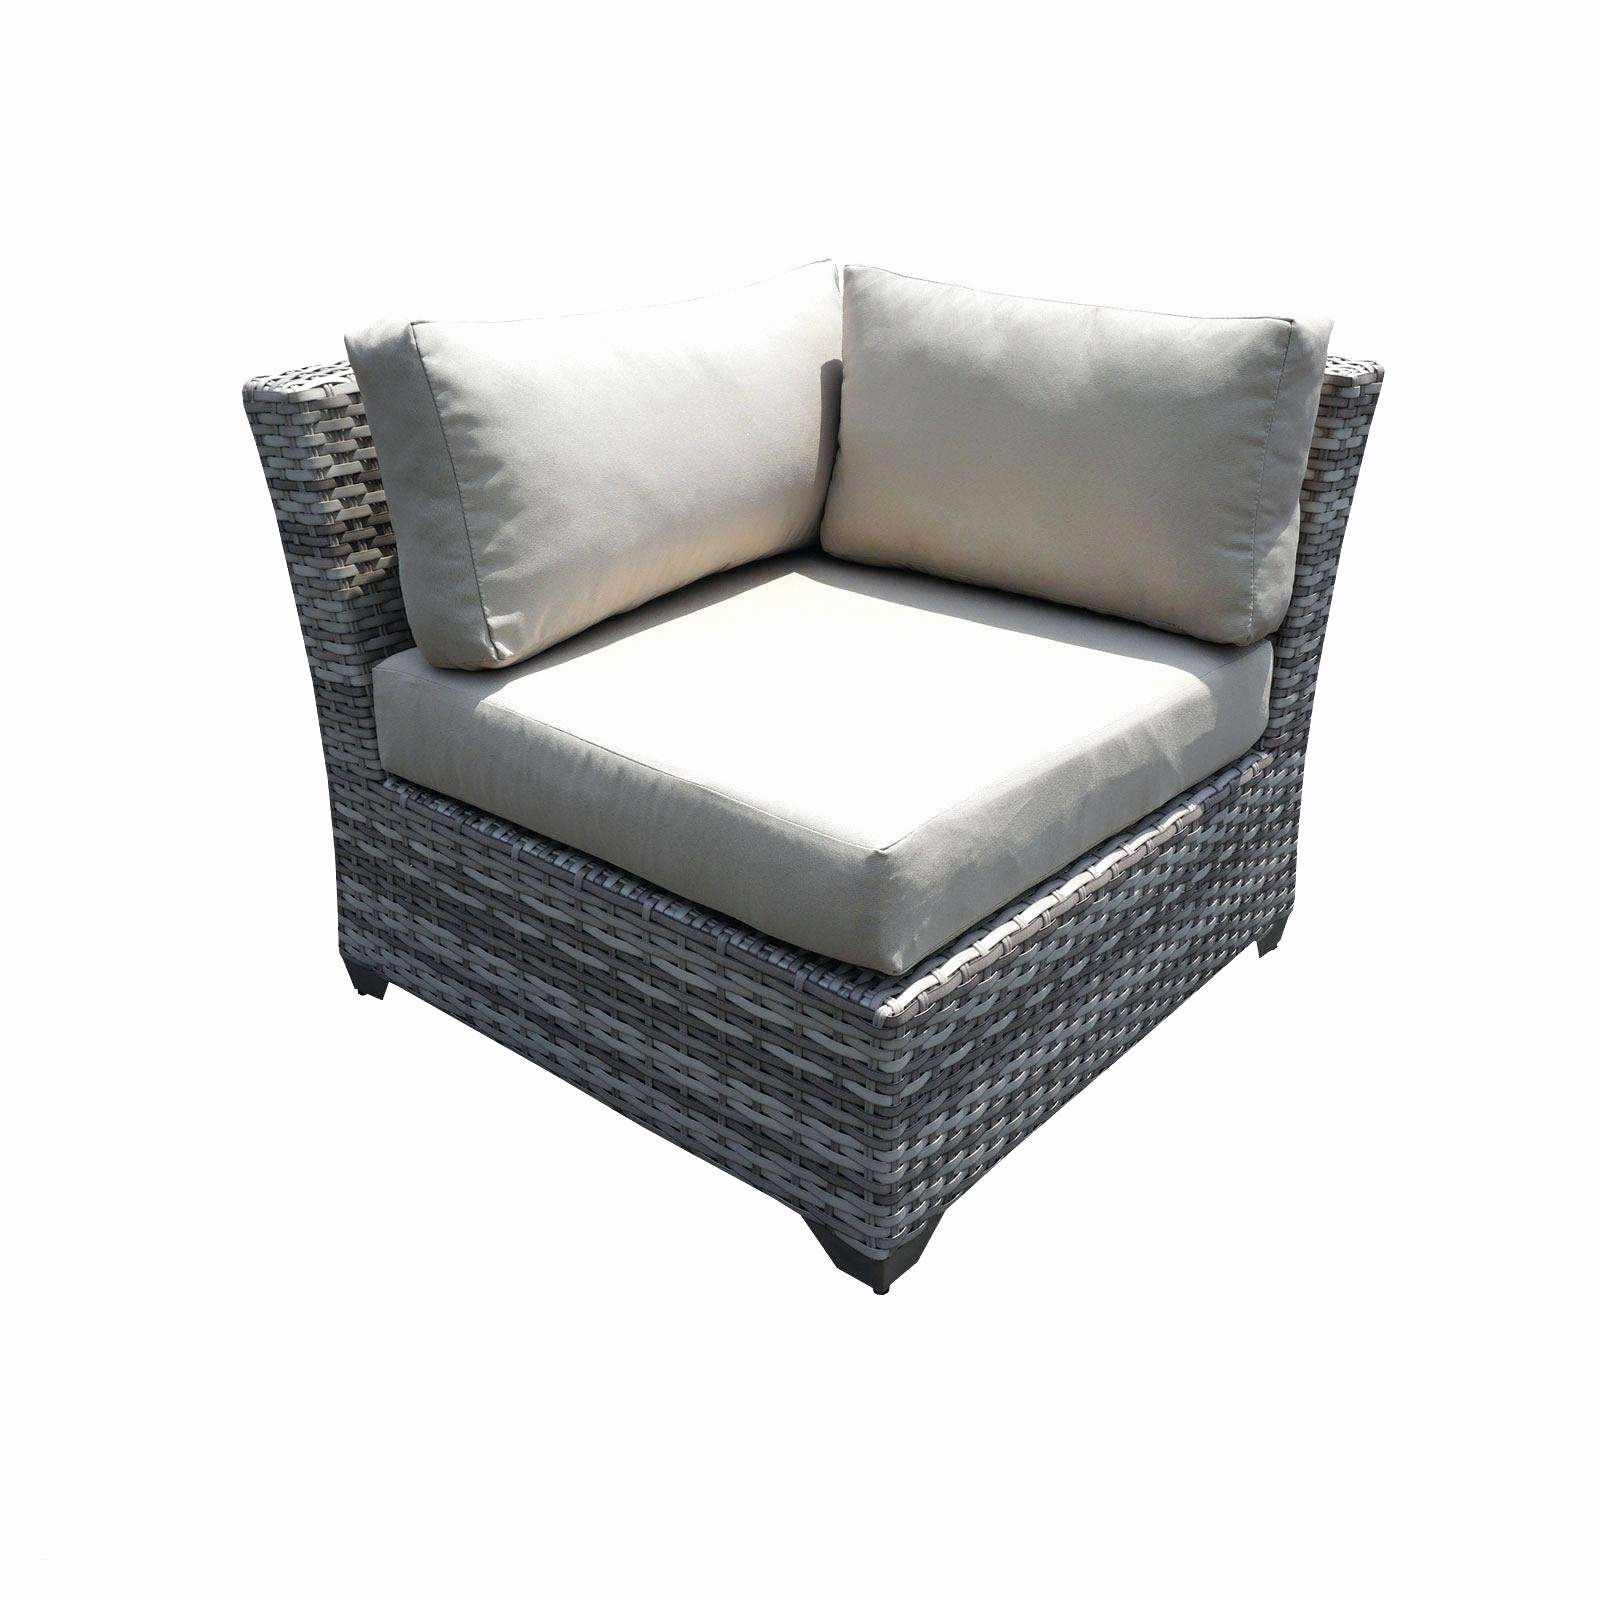 Simple 25 2 Piece Sectionals With Chaise Awesome | Russiandesignshow Intended For Aquarius Dark Grey 2 Piece Sectionals With Laf Chaise (View 17 of 25)